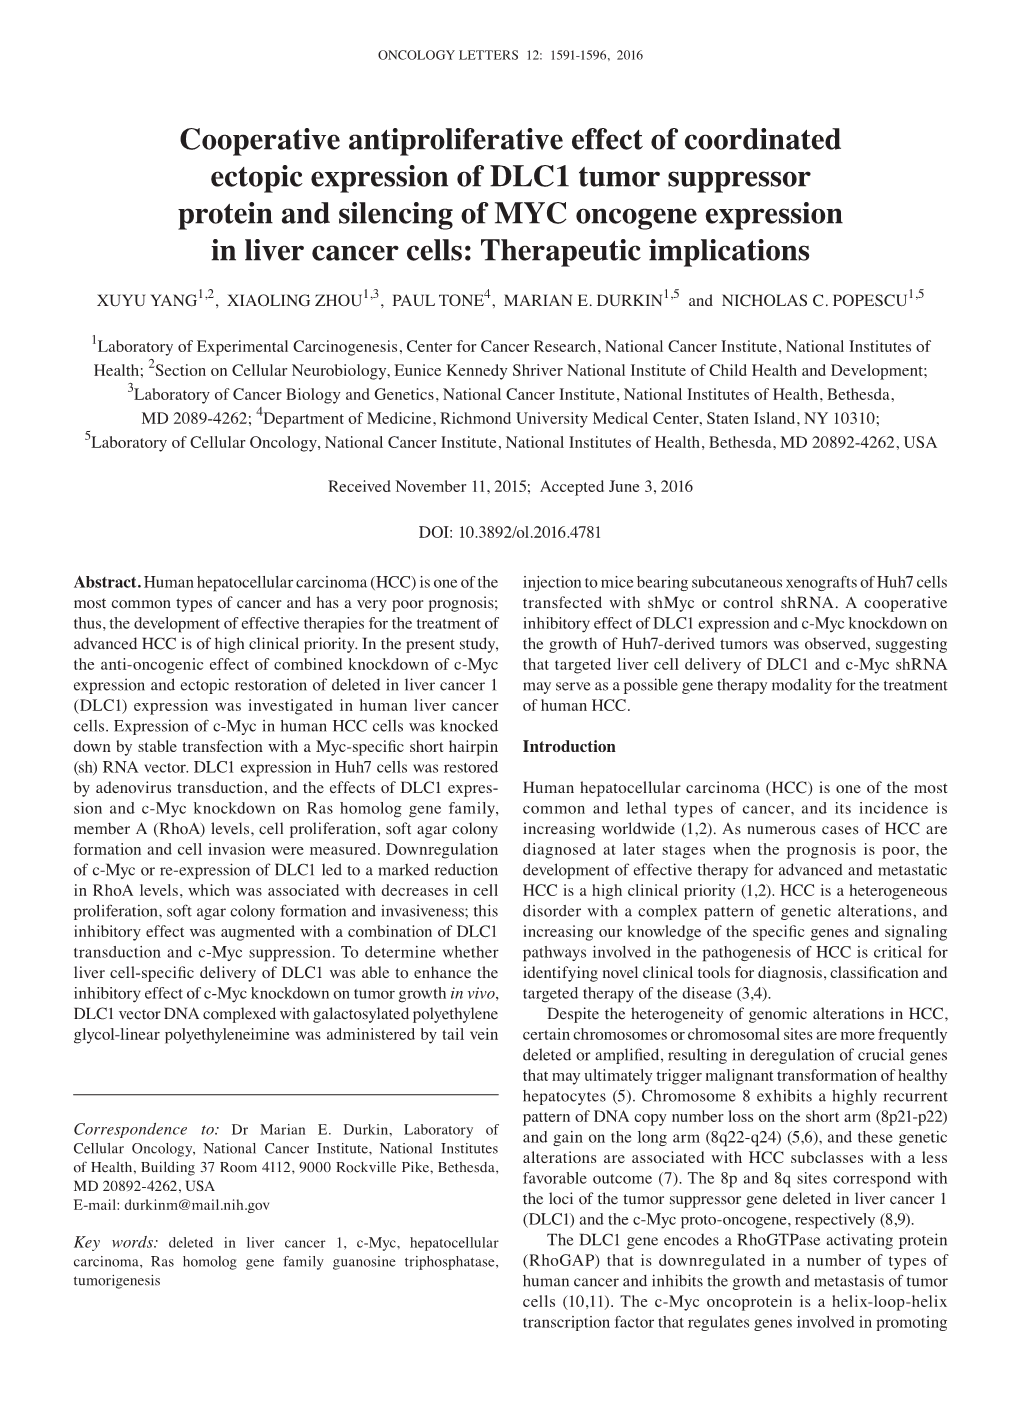 Cooperative Antiproliferative Effect of Coordinated Ectopic Expression Of